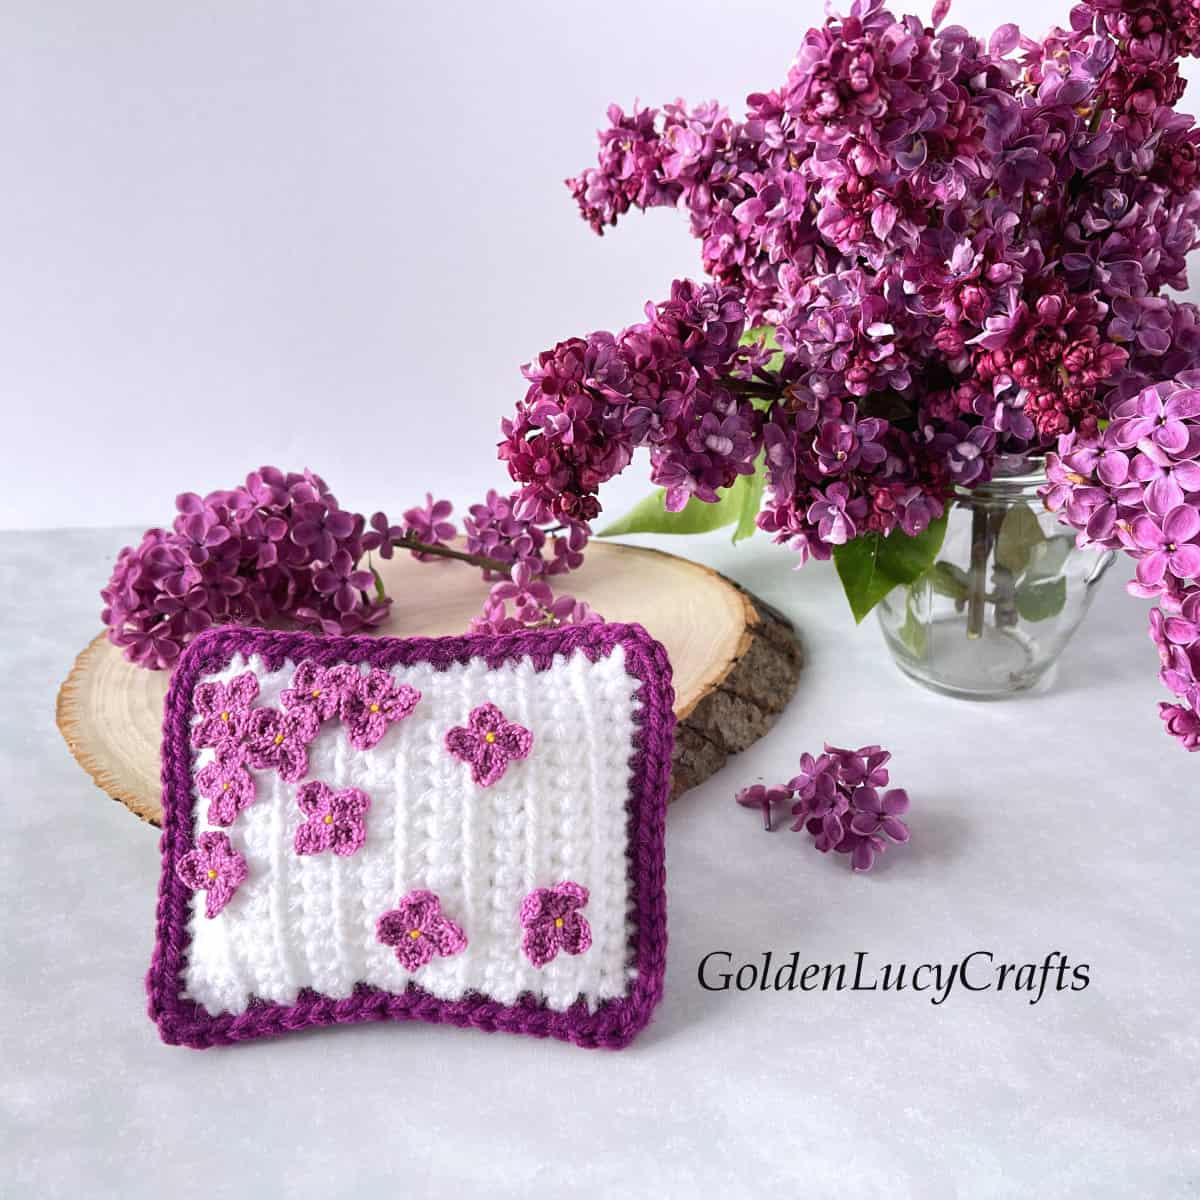 Crochet decorative mini pillow embellished with crocheted lilac flowers.